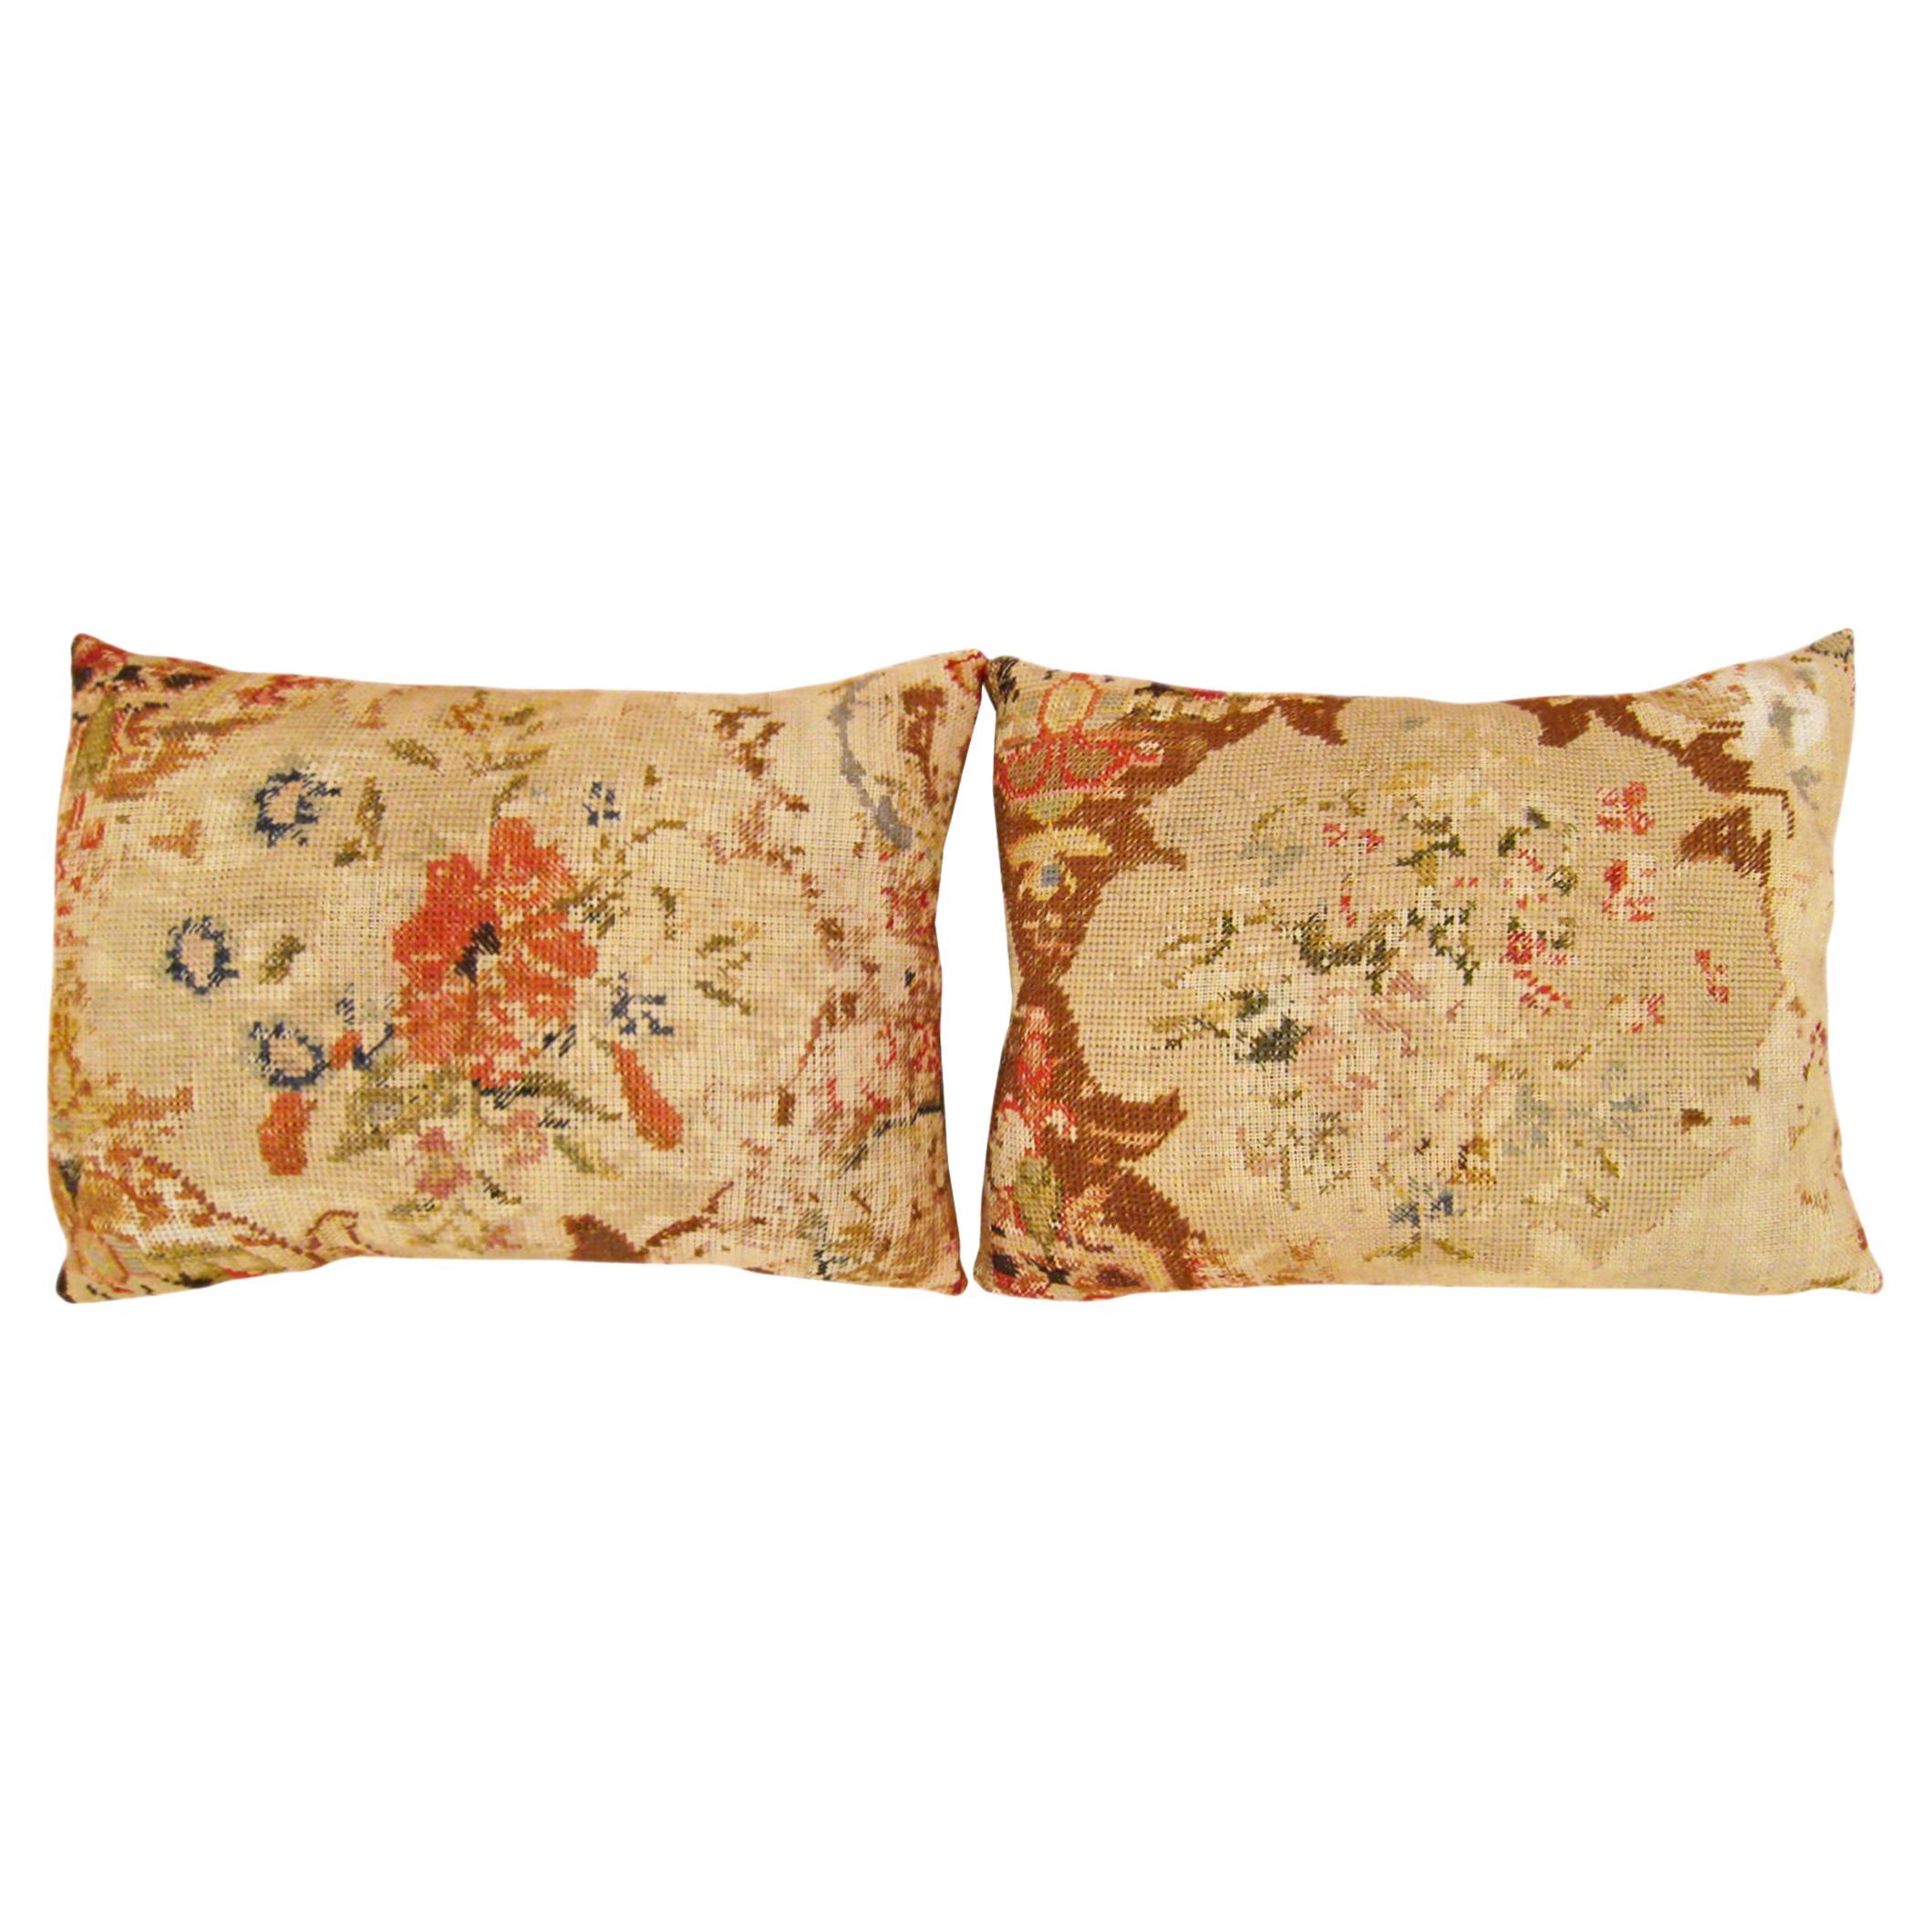 Pair of Antique Decorative English Needlepoint Rug Pillows with Floral